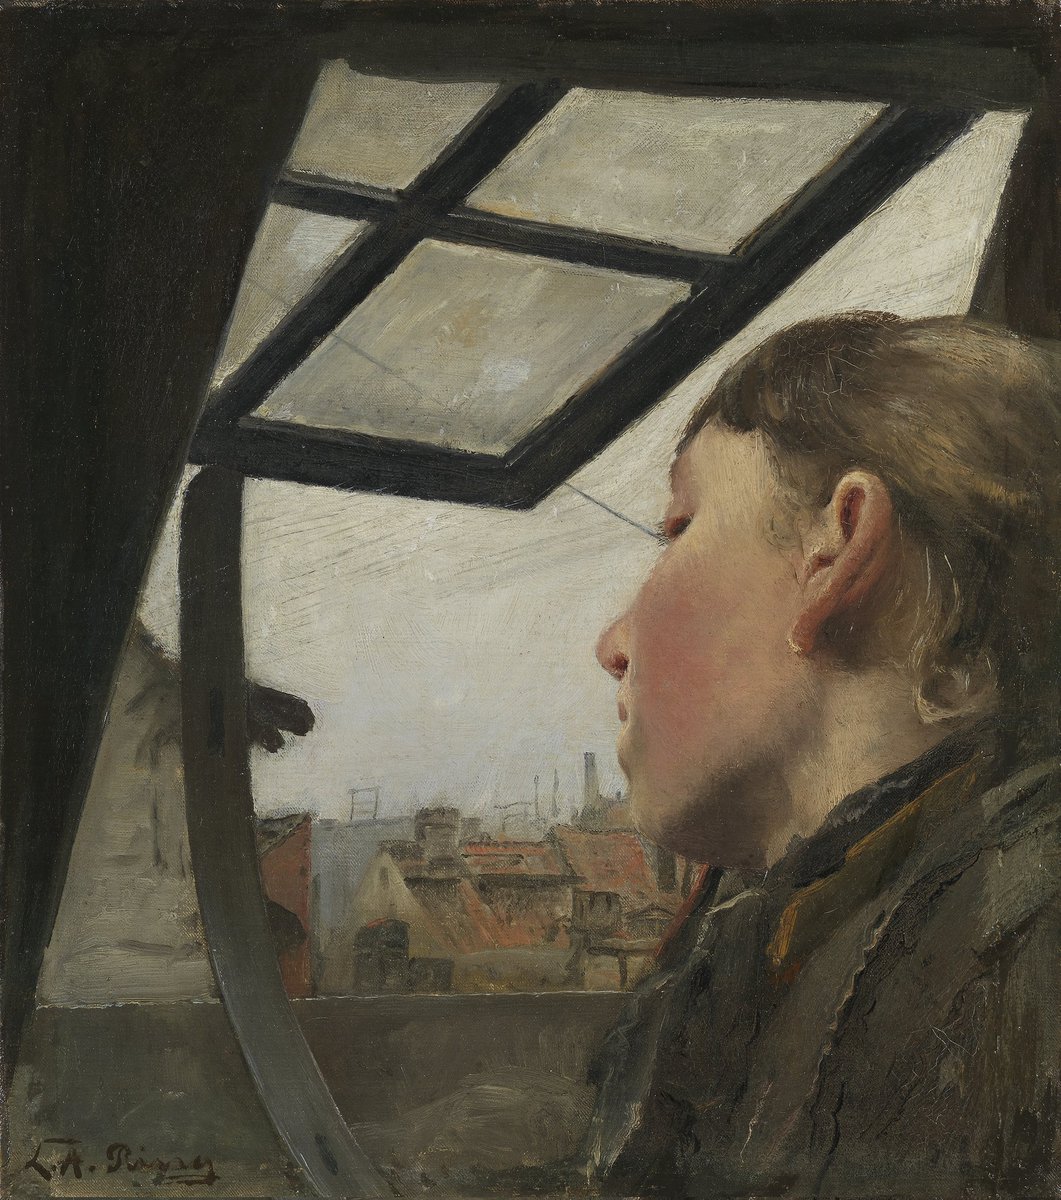 'Young girl looking out of a roof window' (year1885) by Laurits Andersen Ring
#art #paintings #artist #coolart #funart #watercolor #oilpaintings #fineart #arthistory #history #love